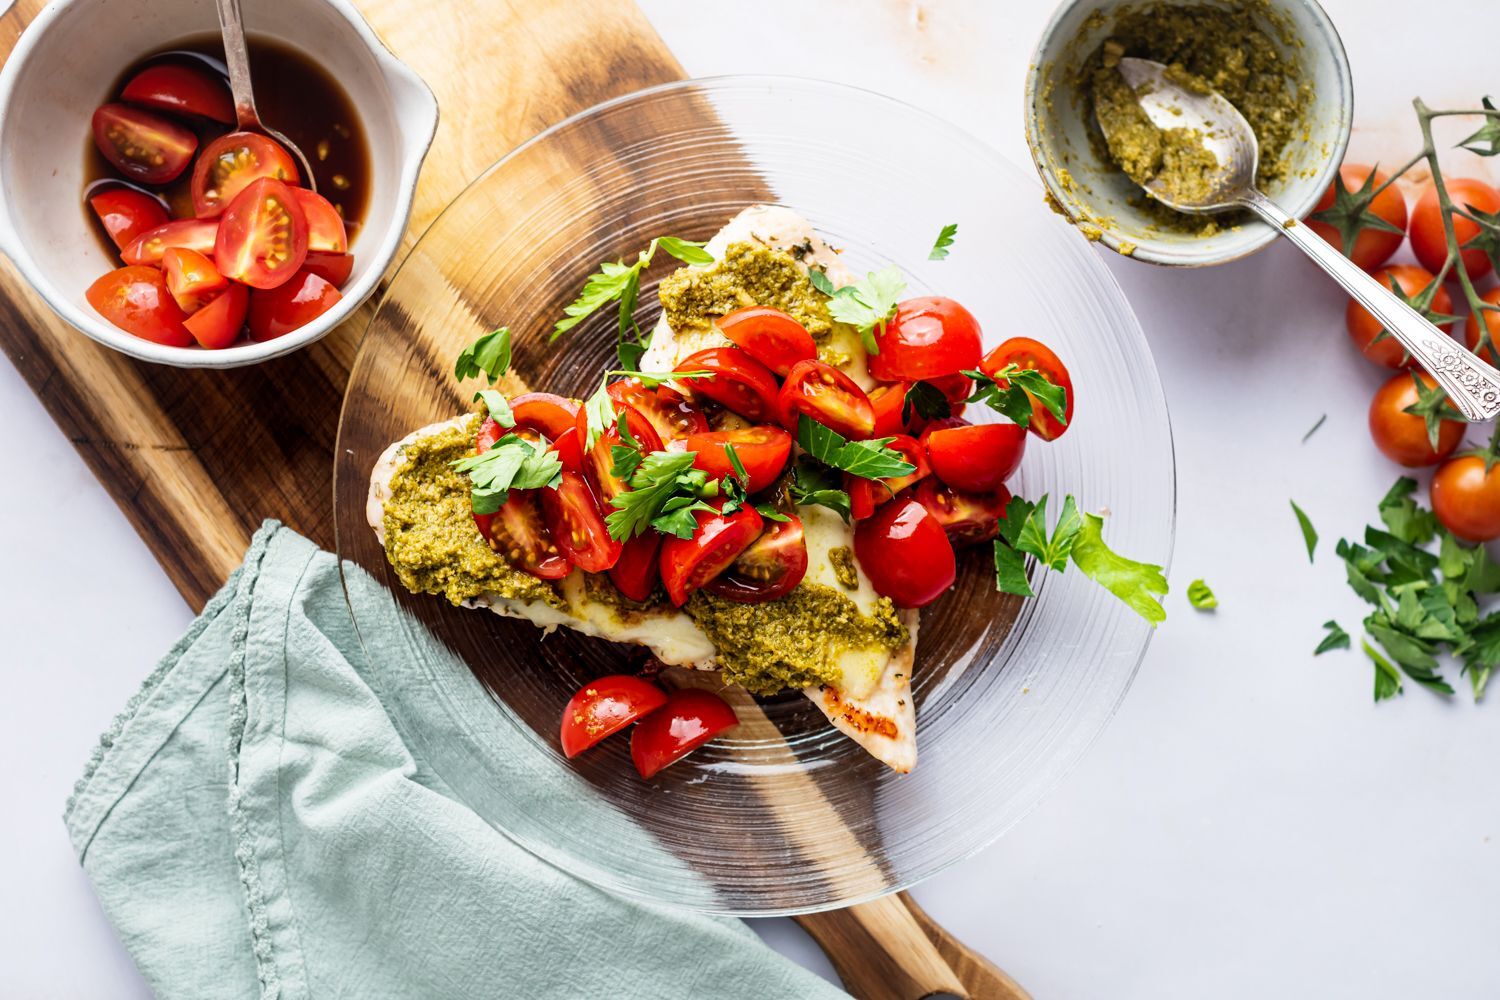 Grilled chicken margherita with cherry tomatoes, melted mozzarella cheese, and pesto on a plate.